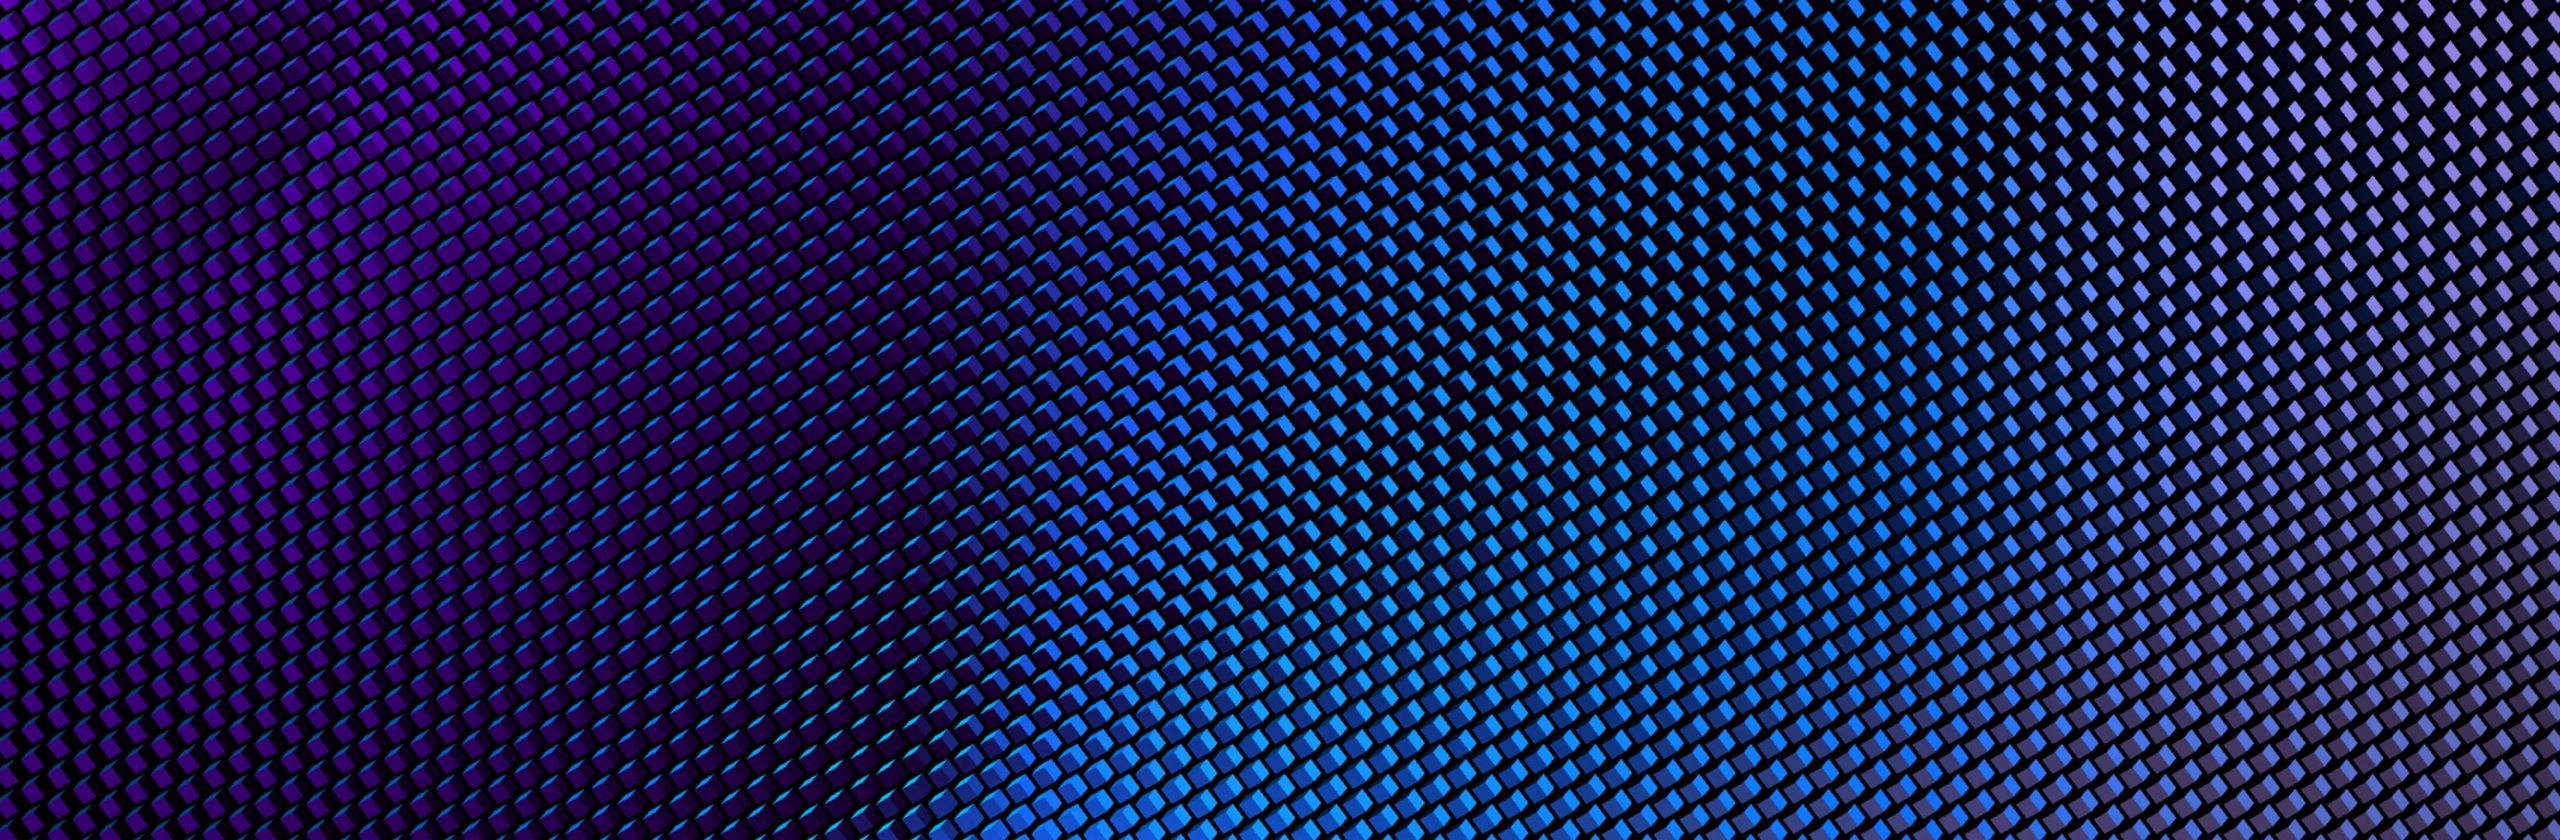 A blue and purple background with a grid pattern, perfect for IoT applications.